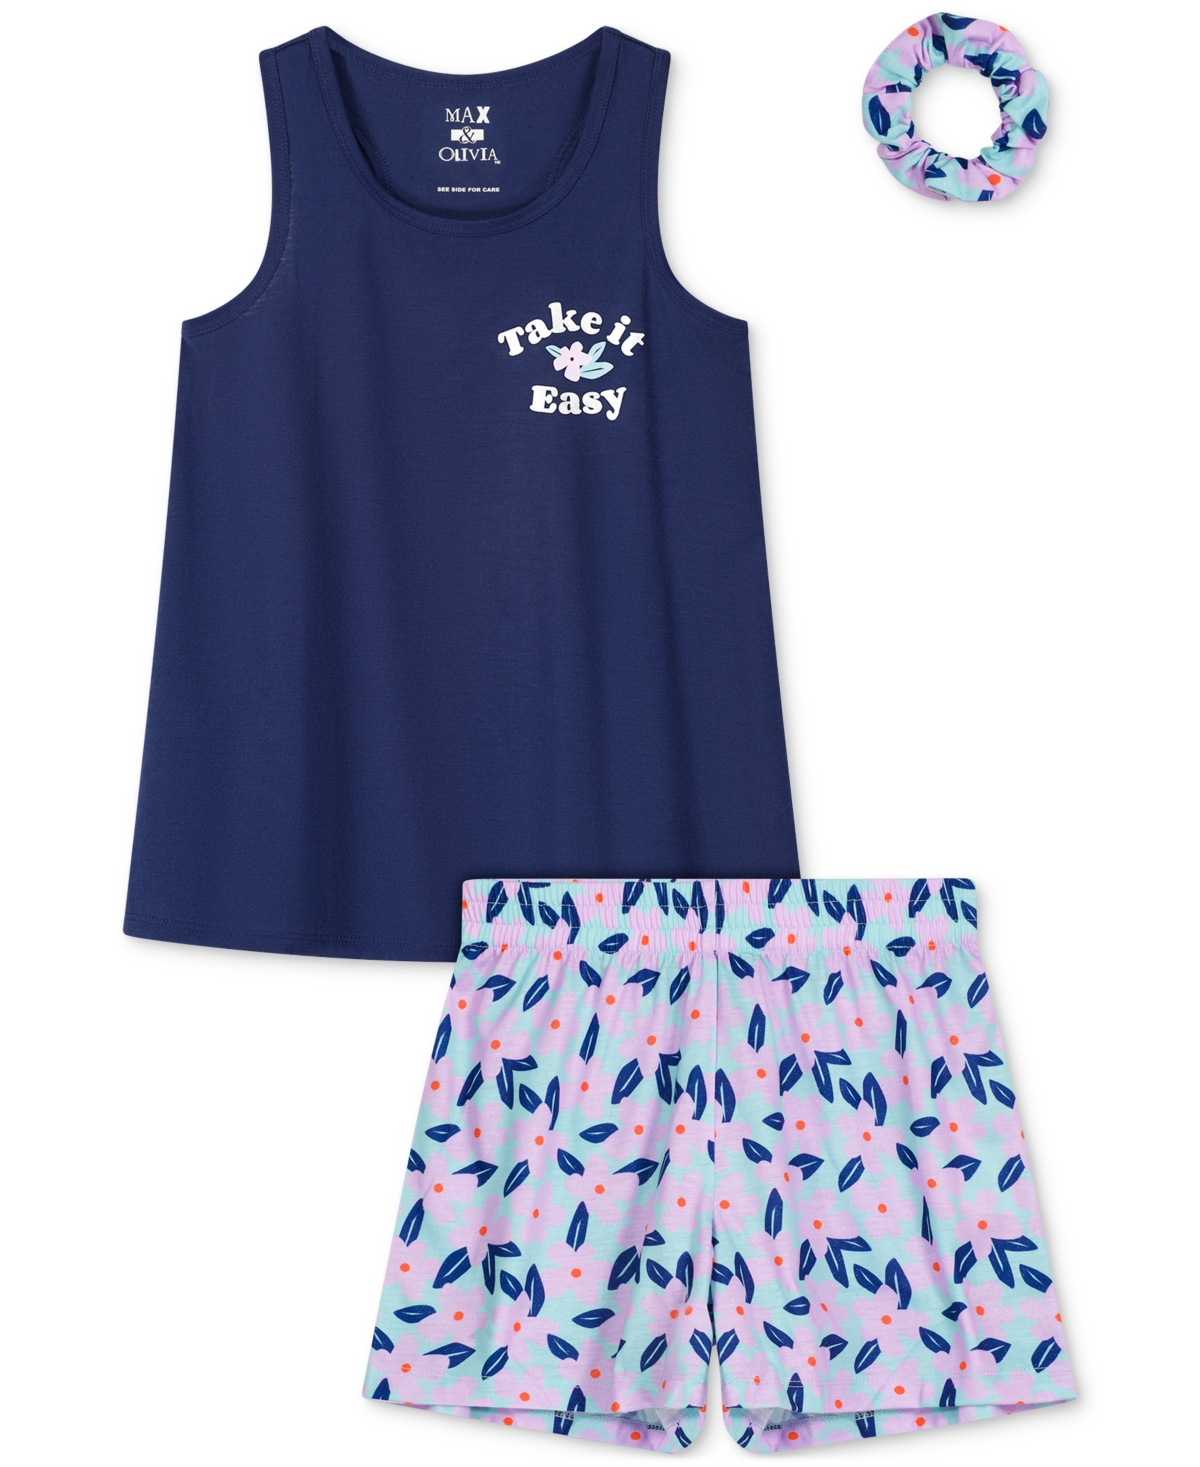 Max & Olivia Kids' Max And Olivia Girls 3-pc. Take It Easy Short & Top Pajama Set In Navy